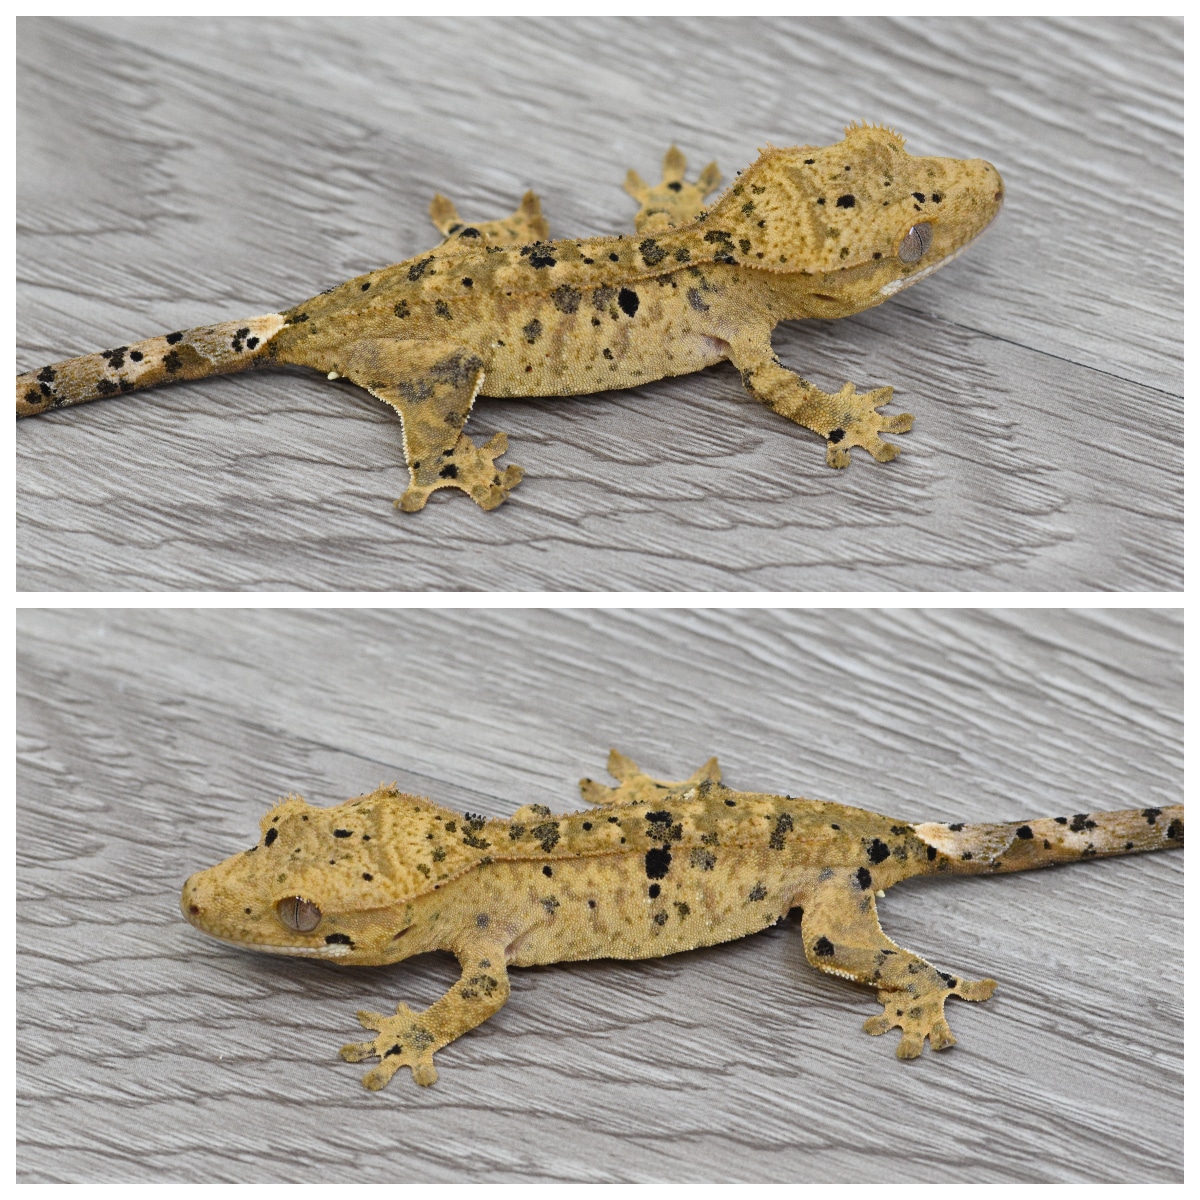 Ink Spot Oil Spot Red Spot Possible Super Dalmatian - Yellow Base Crested Gecko by Kryptiles